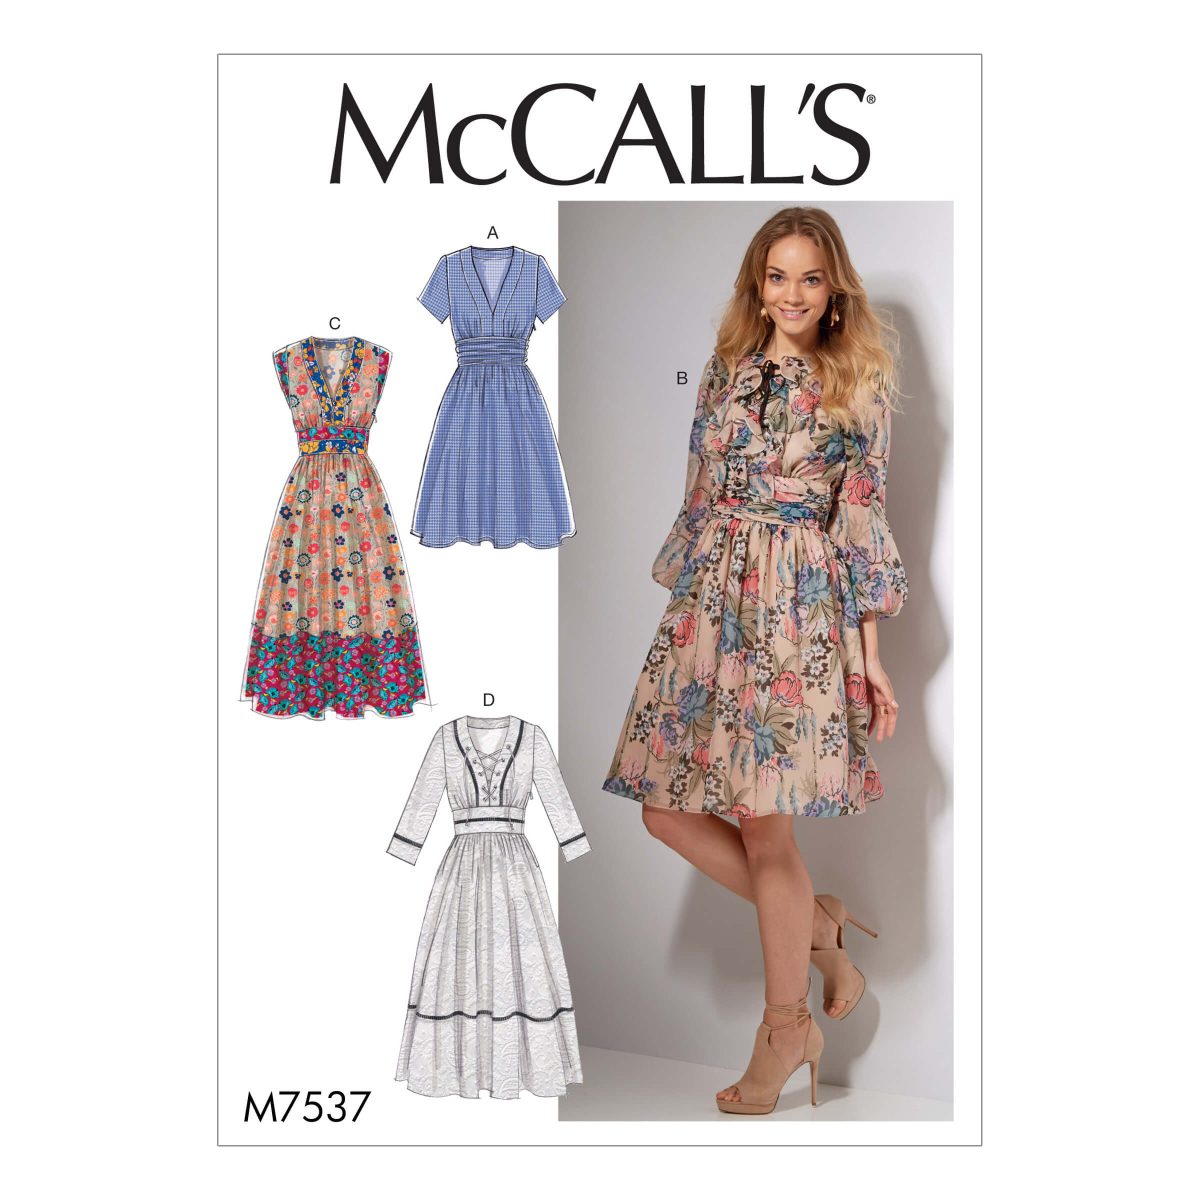 McCall's Sewing Pattern M7537 Misses' Banded, Gathered-Waist Dresses